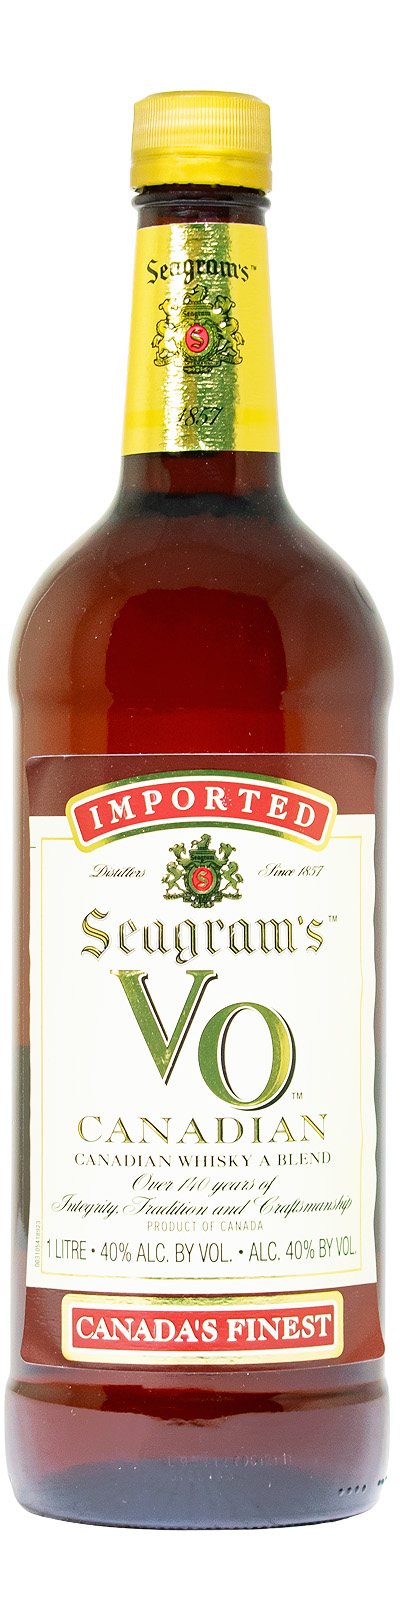 Seagrams VO Canadian Whisky - 1 Liter 40% vol